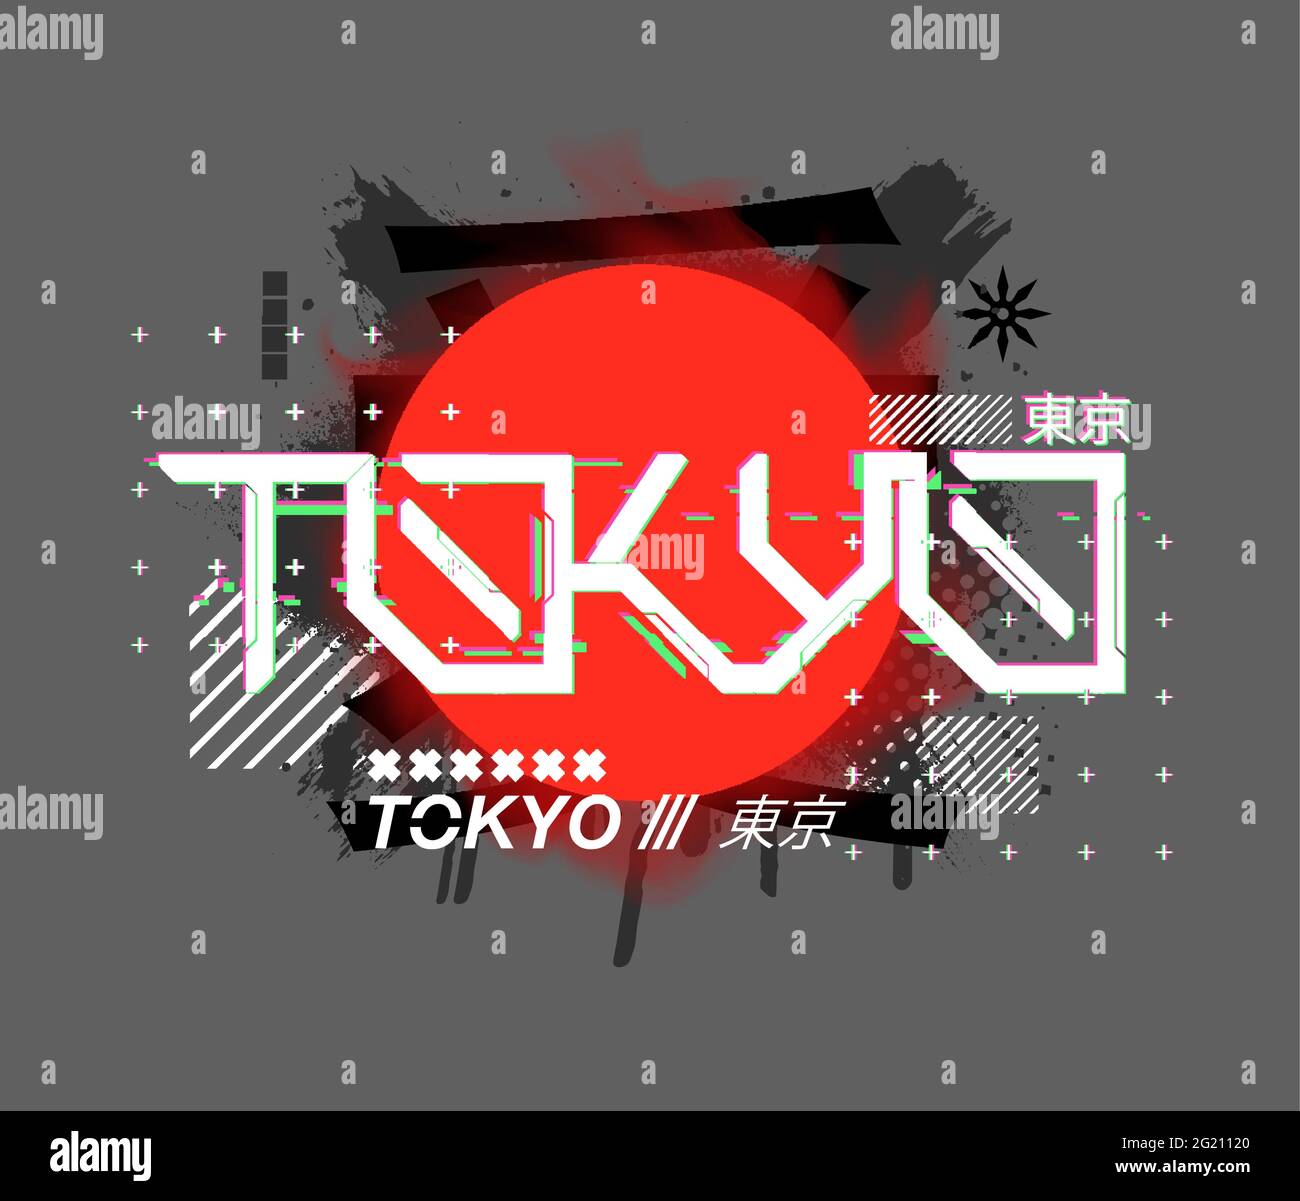 Tokyo Artwork For Design Merch T Shirt Posters A Traditional Symbol For The Rising Sun Of Japan With Futuristic Lettering And Modern Touches Stock Vector Image Art Alamy